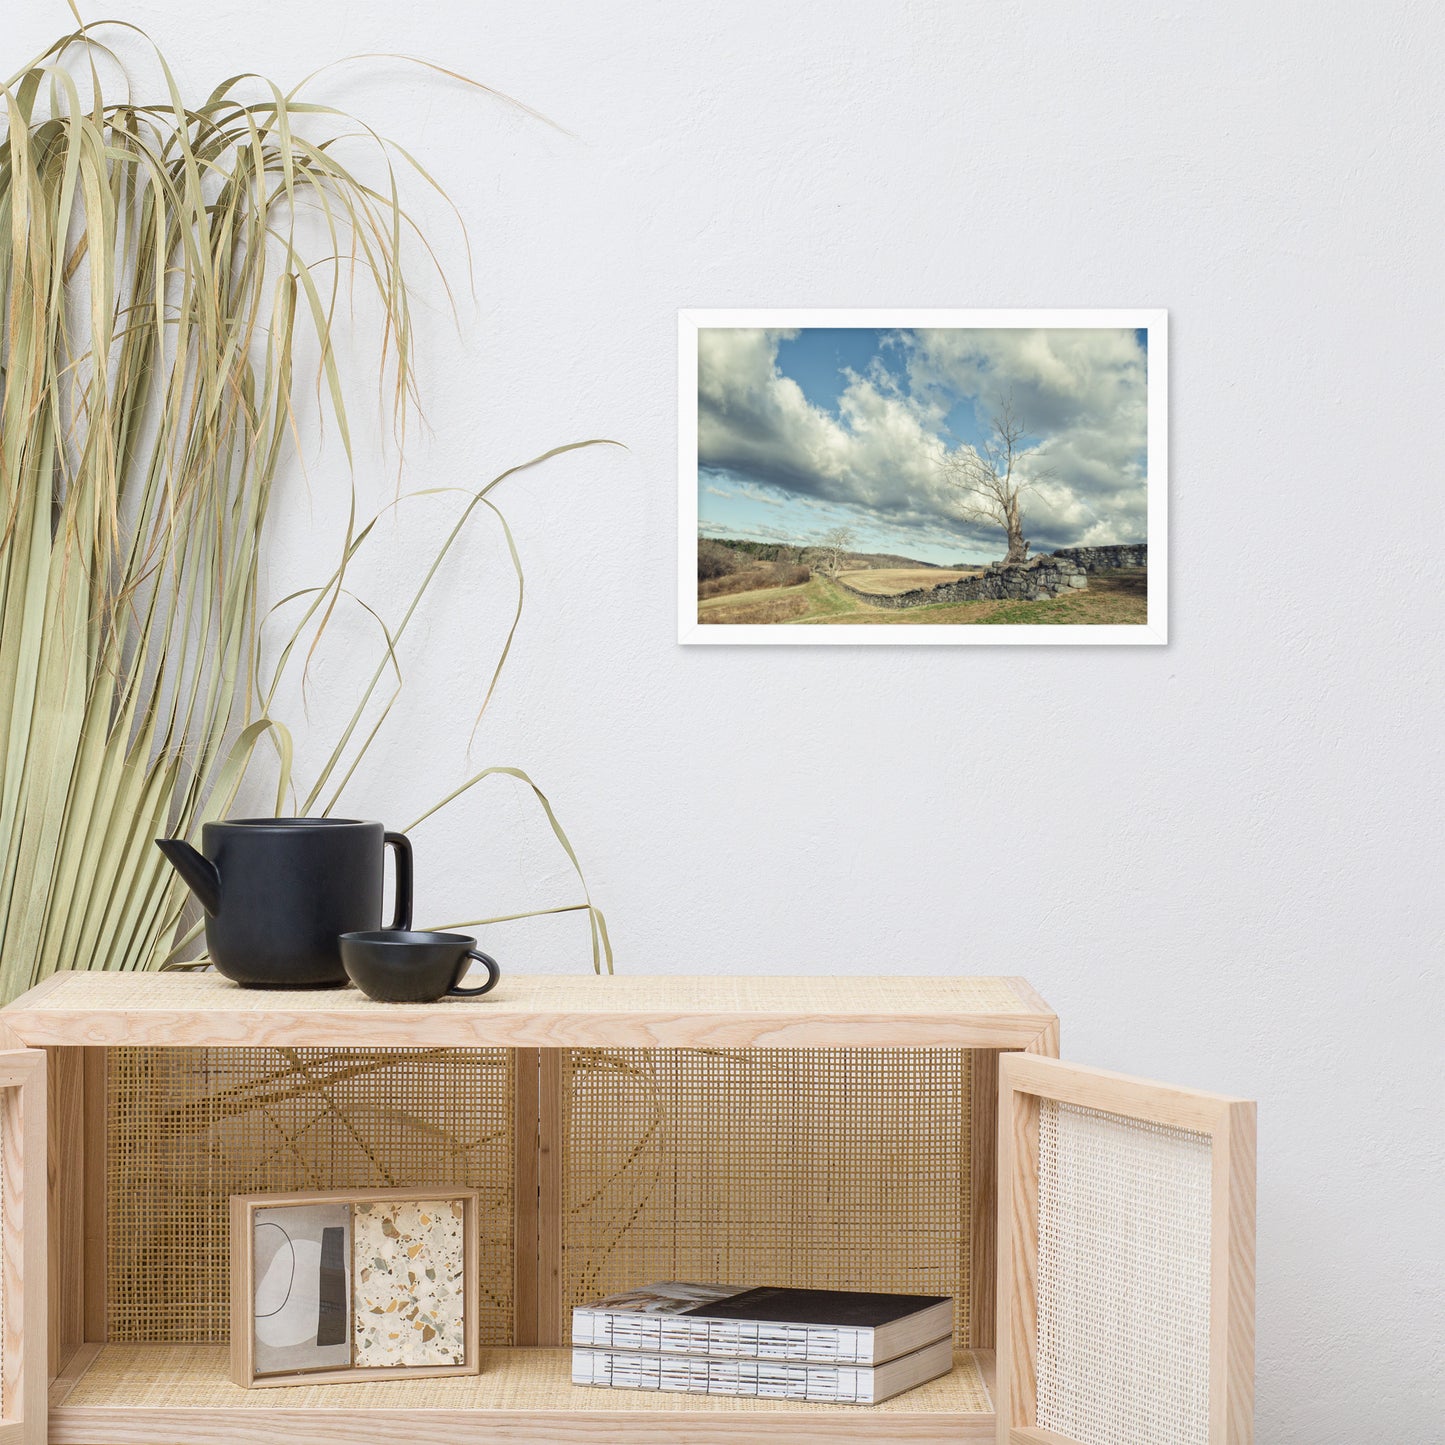 Dead Tree and Stone Wall - Split Toned Framed Photo Paper Wall Art Prints